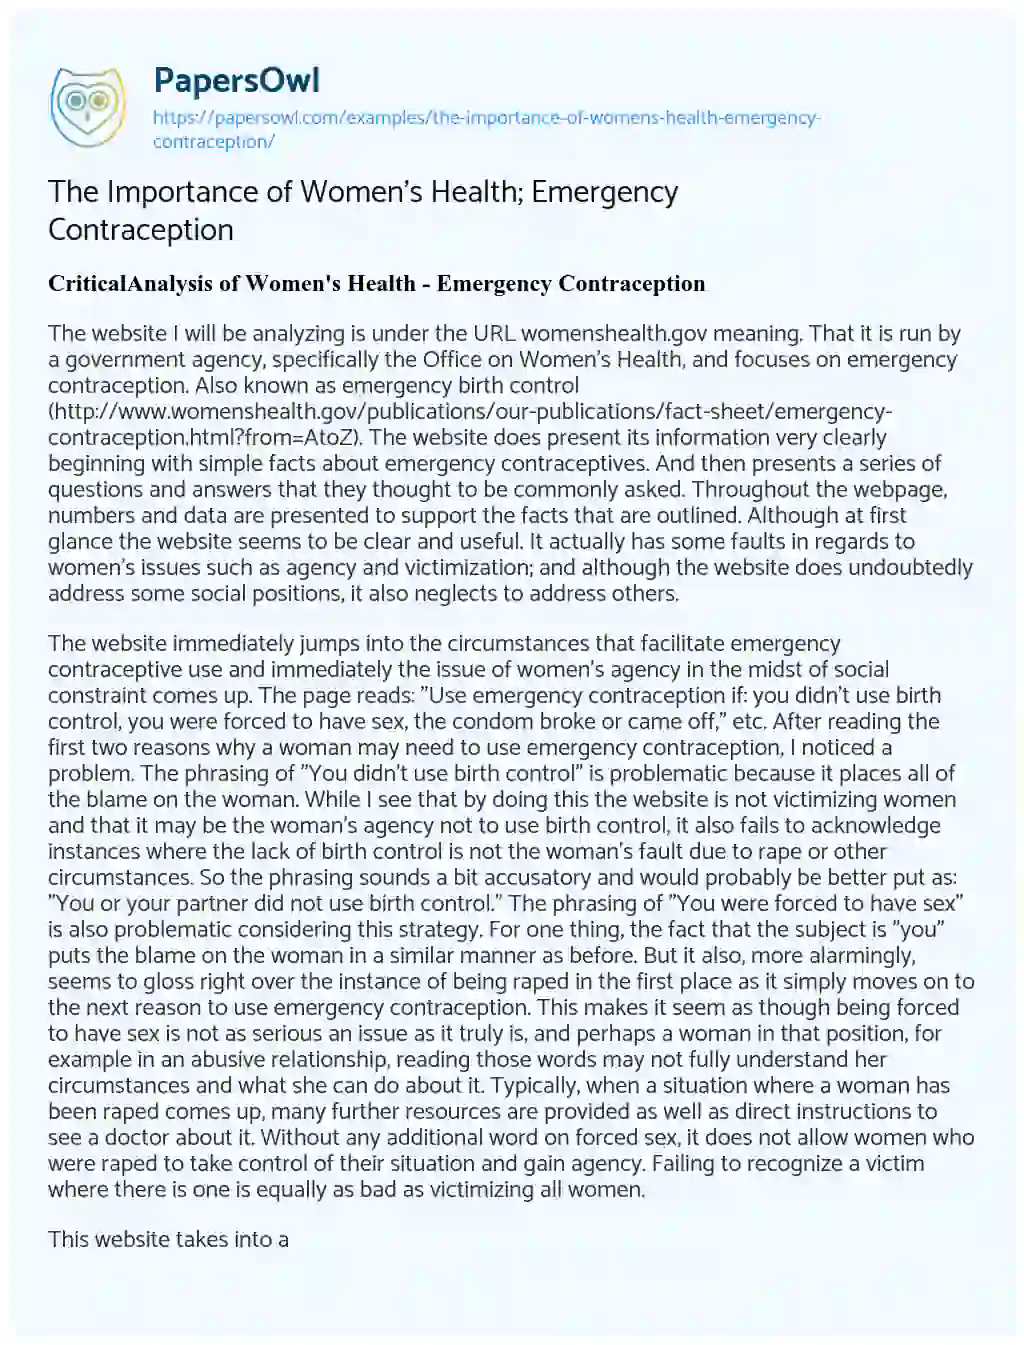 Essay on The Importance of Women’s Health; Emergency Contraception